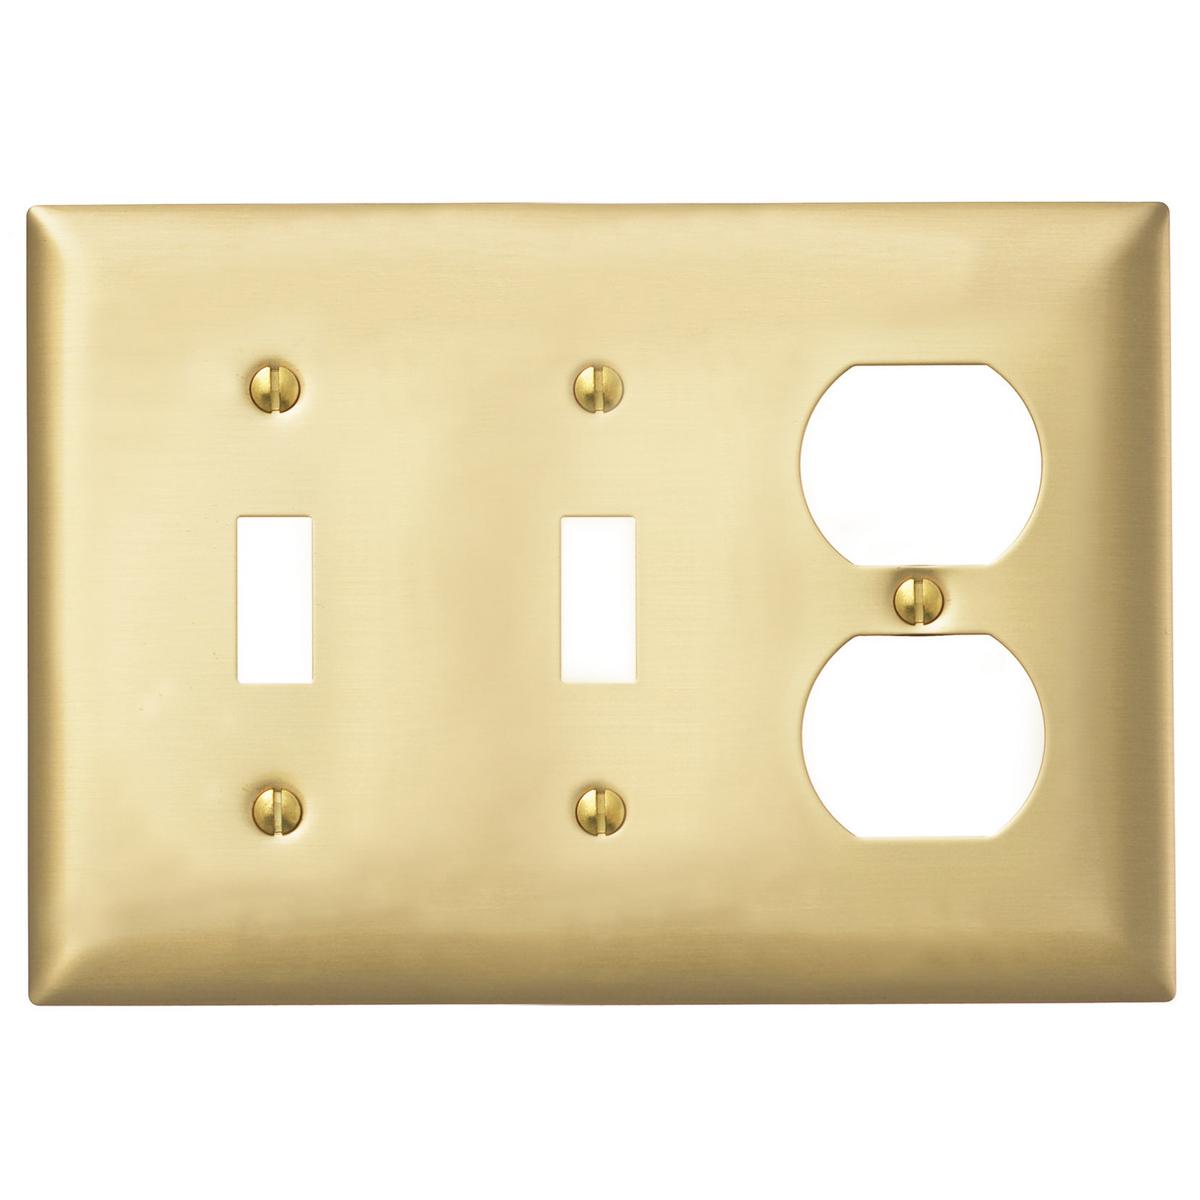 Hubbell SBP28 Wallplates and Boxes, Metallic Plates, 3- Gang, 2) Toggle, 1) Duplex, Standard Size, Brass Plated Steel  ; Non-magnetic and corrosion resistant ; Finish is lacquer coated to inhibit oxidation ; Protective plastic film helps to prevent scratches and damage